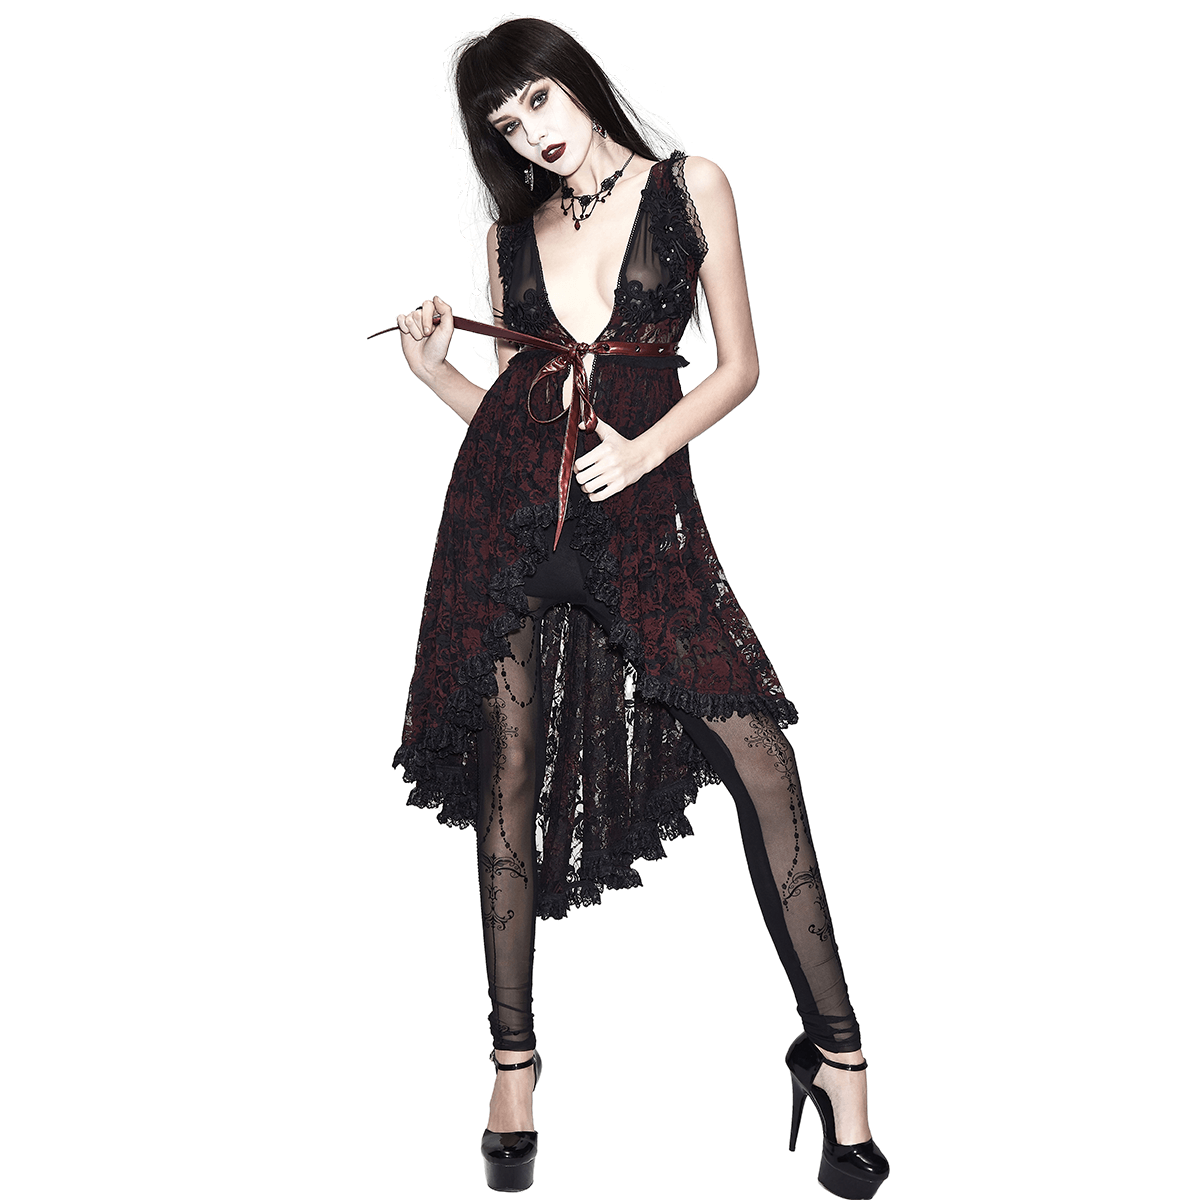 Sexy Transparent Lace Night Dress / Romantic Gothic Dress with Lacing at the Back - HARD'N'HEAVY